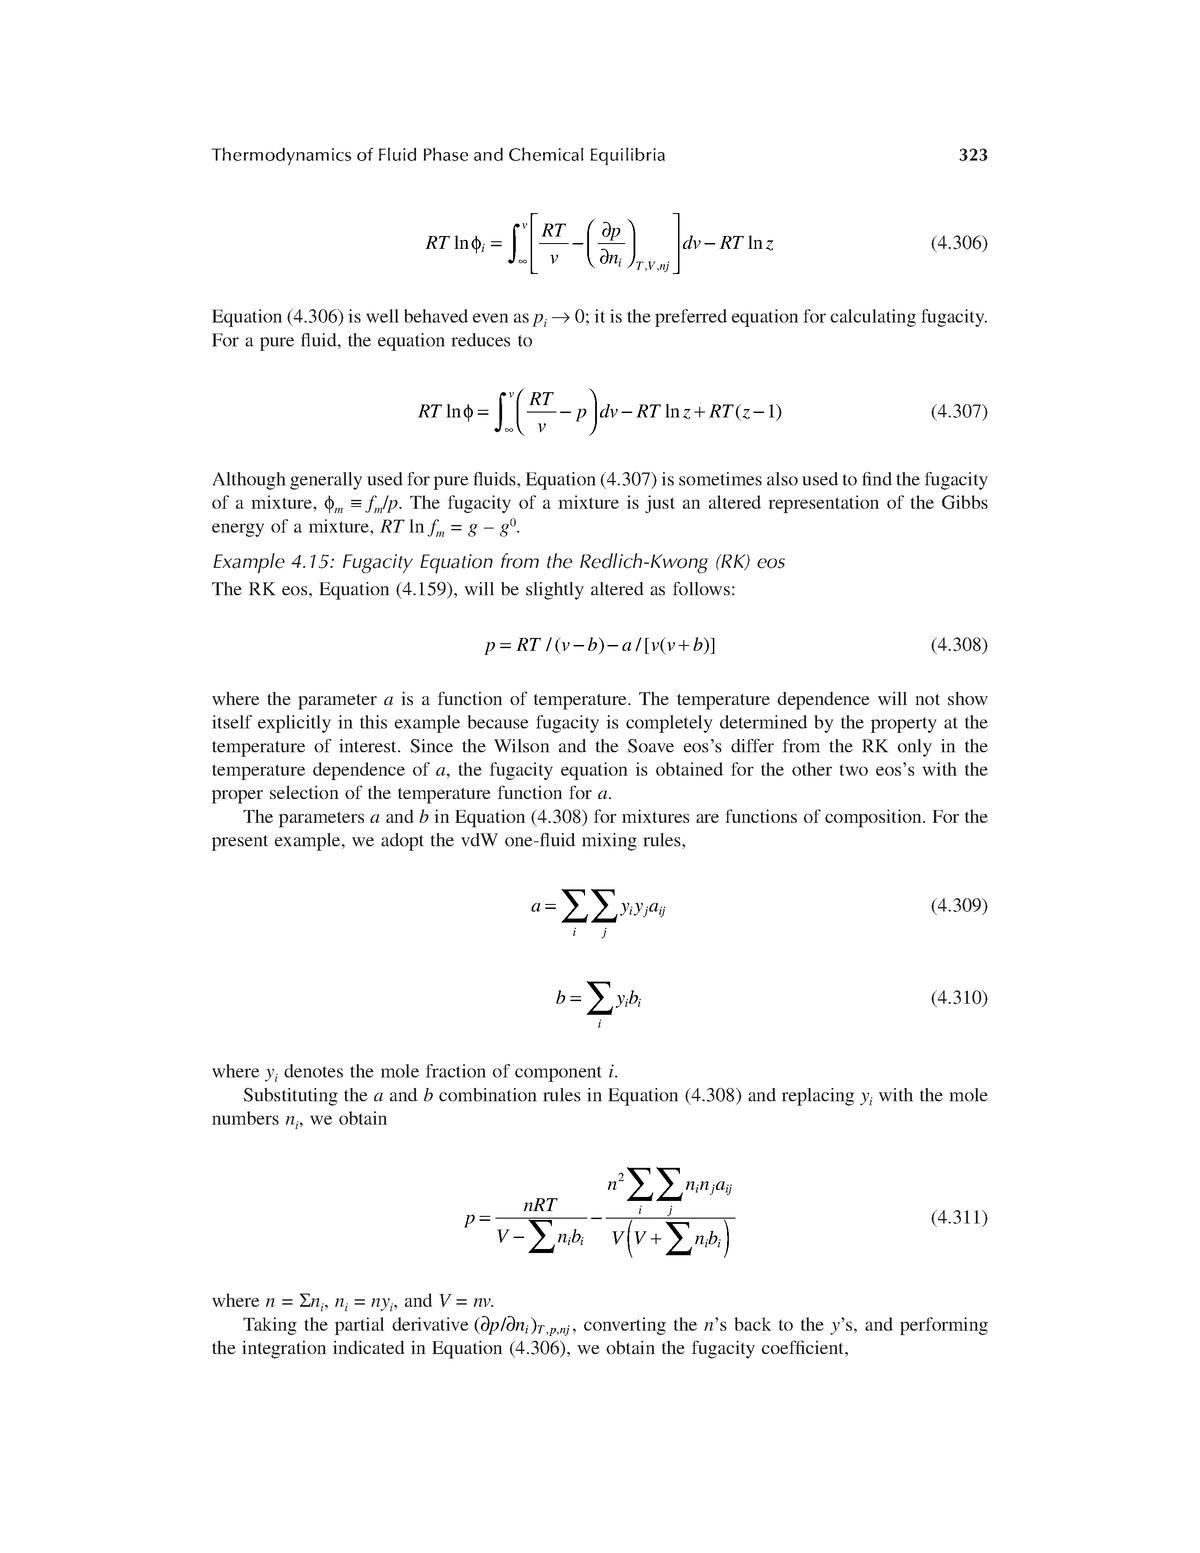 Albright's Chemical Engineering - Thermodynamics of Fluid Phase and ...